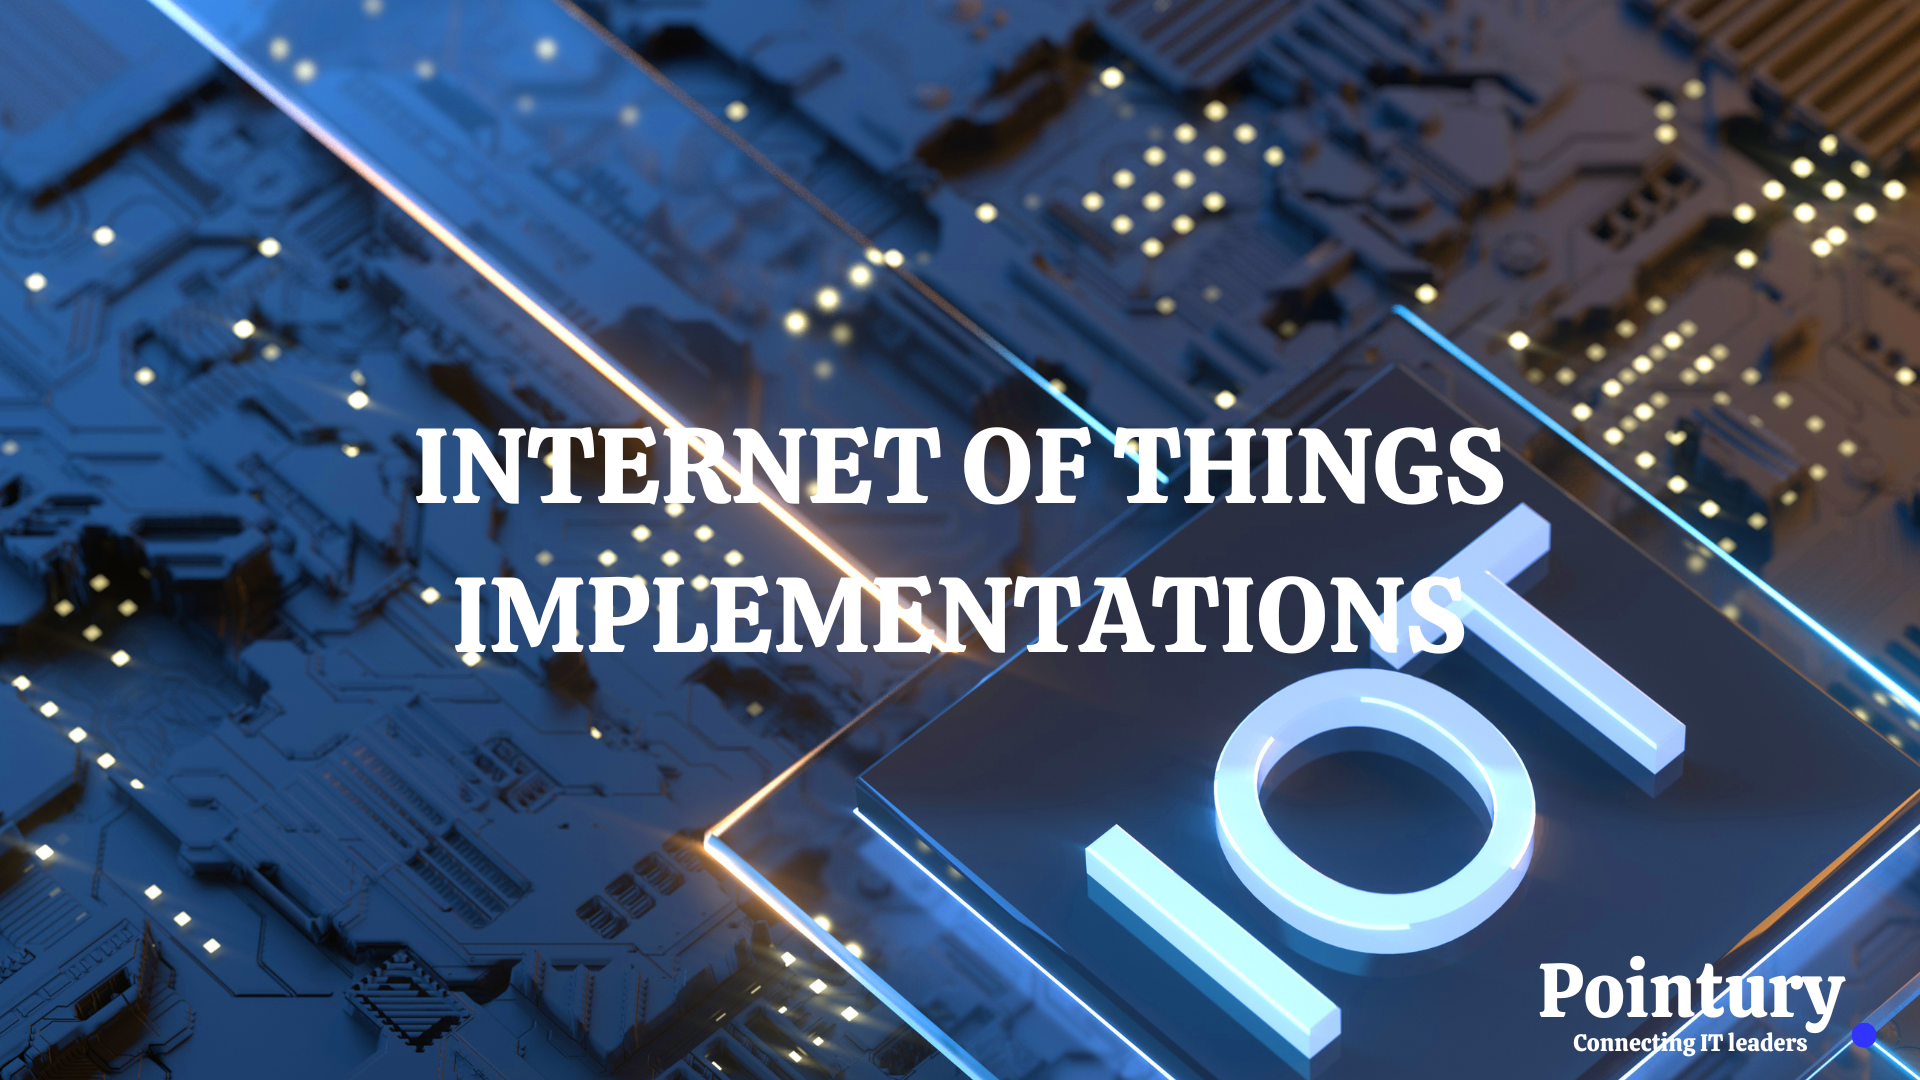 IoT IMPLEMENTATIONS